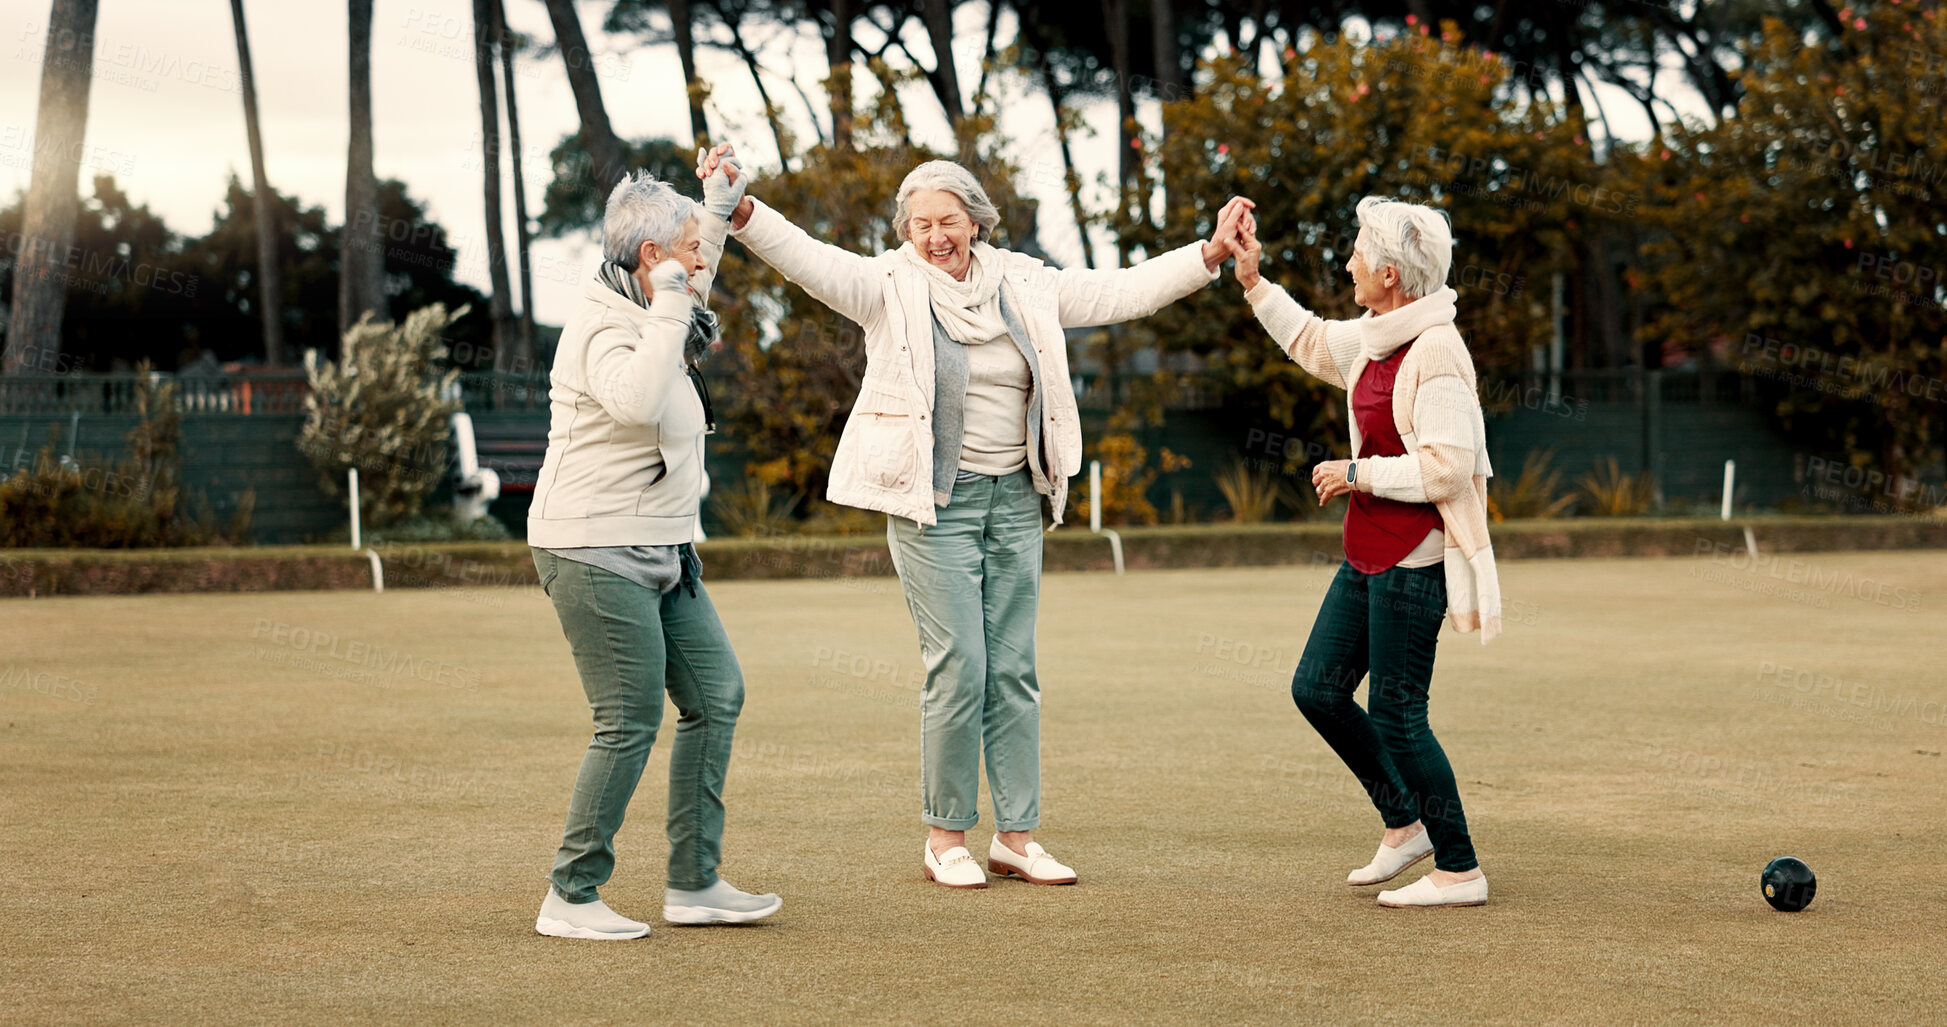 Buy stock photo Senior women, celebration and park for sport, lawn bowling and happy for fitness, goal or applause in nature. Teamwork, elderly lady friends and metal ball for games, contest or win together on grass